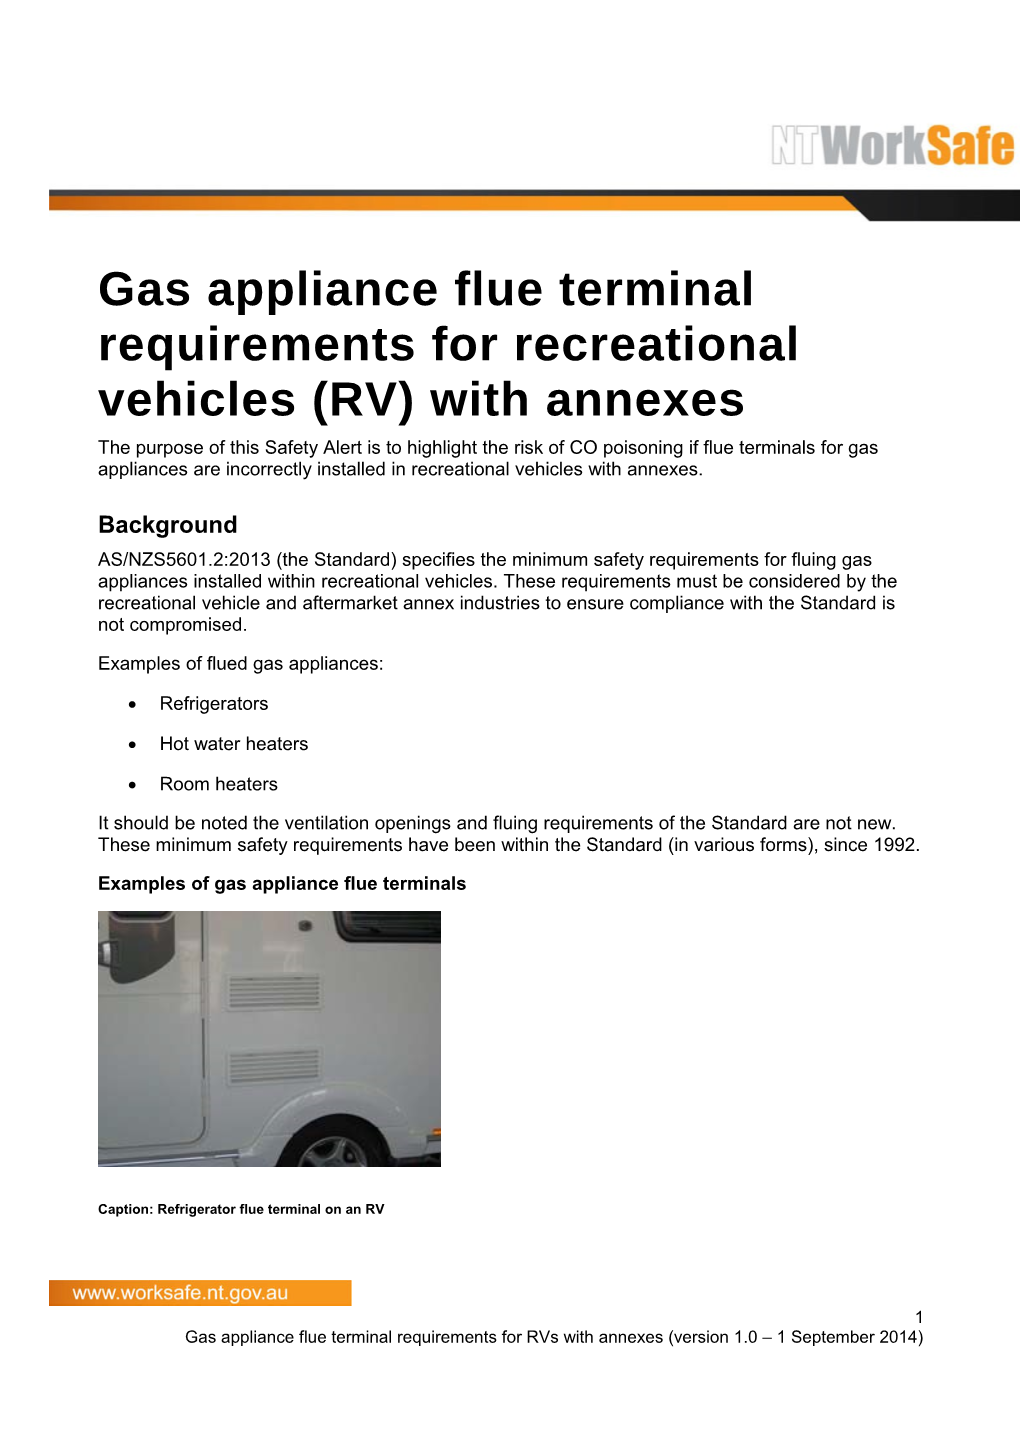 Safety Alert - Gas Appliance Flue Terminal Requirements for Recreational Vehicles (RV)